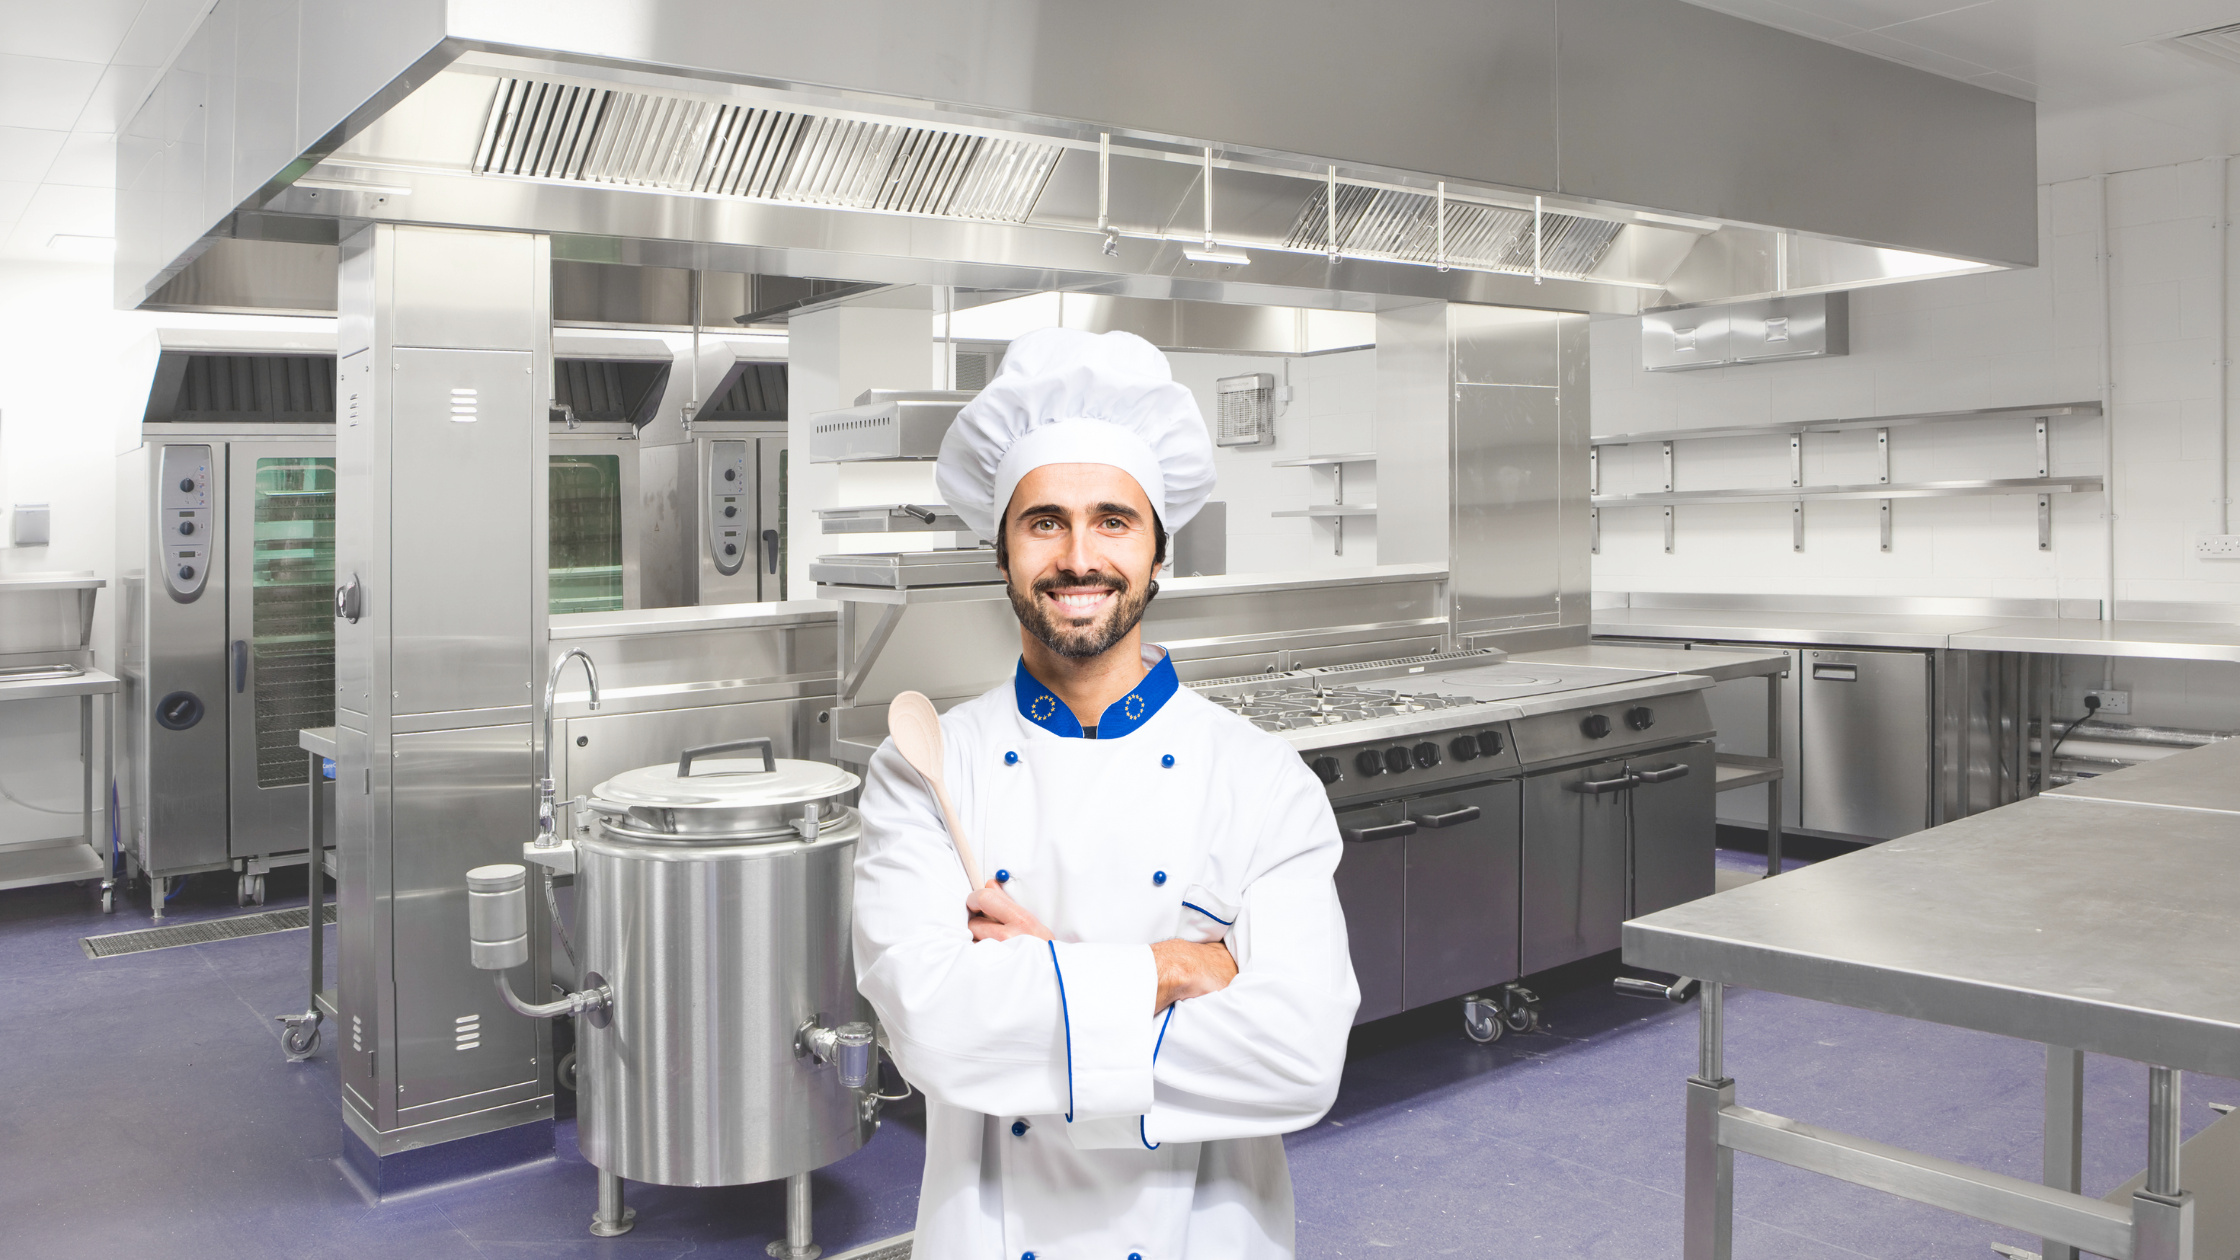 Commercial Kitchen & Catering Business